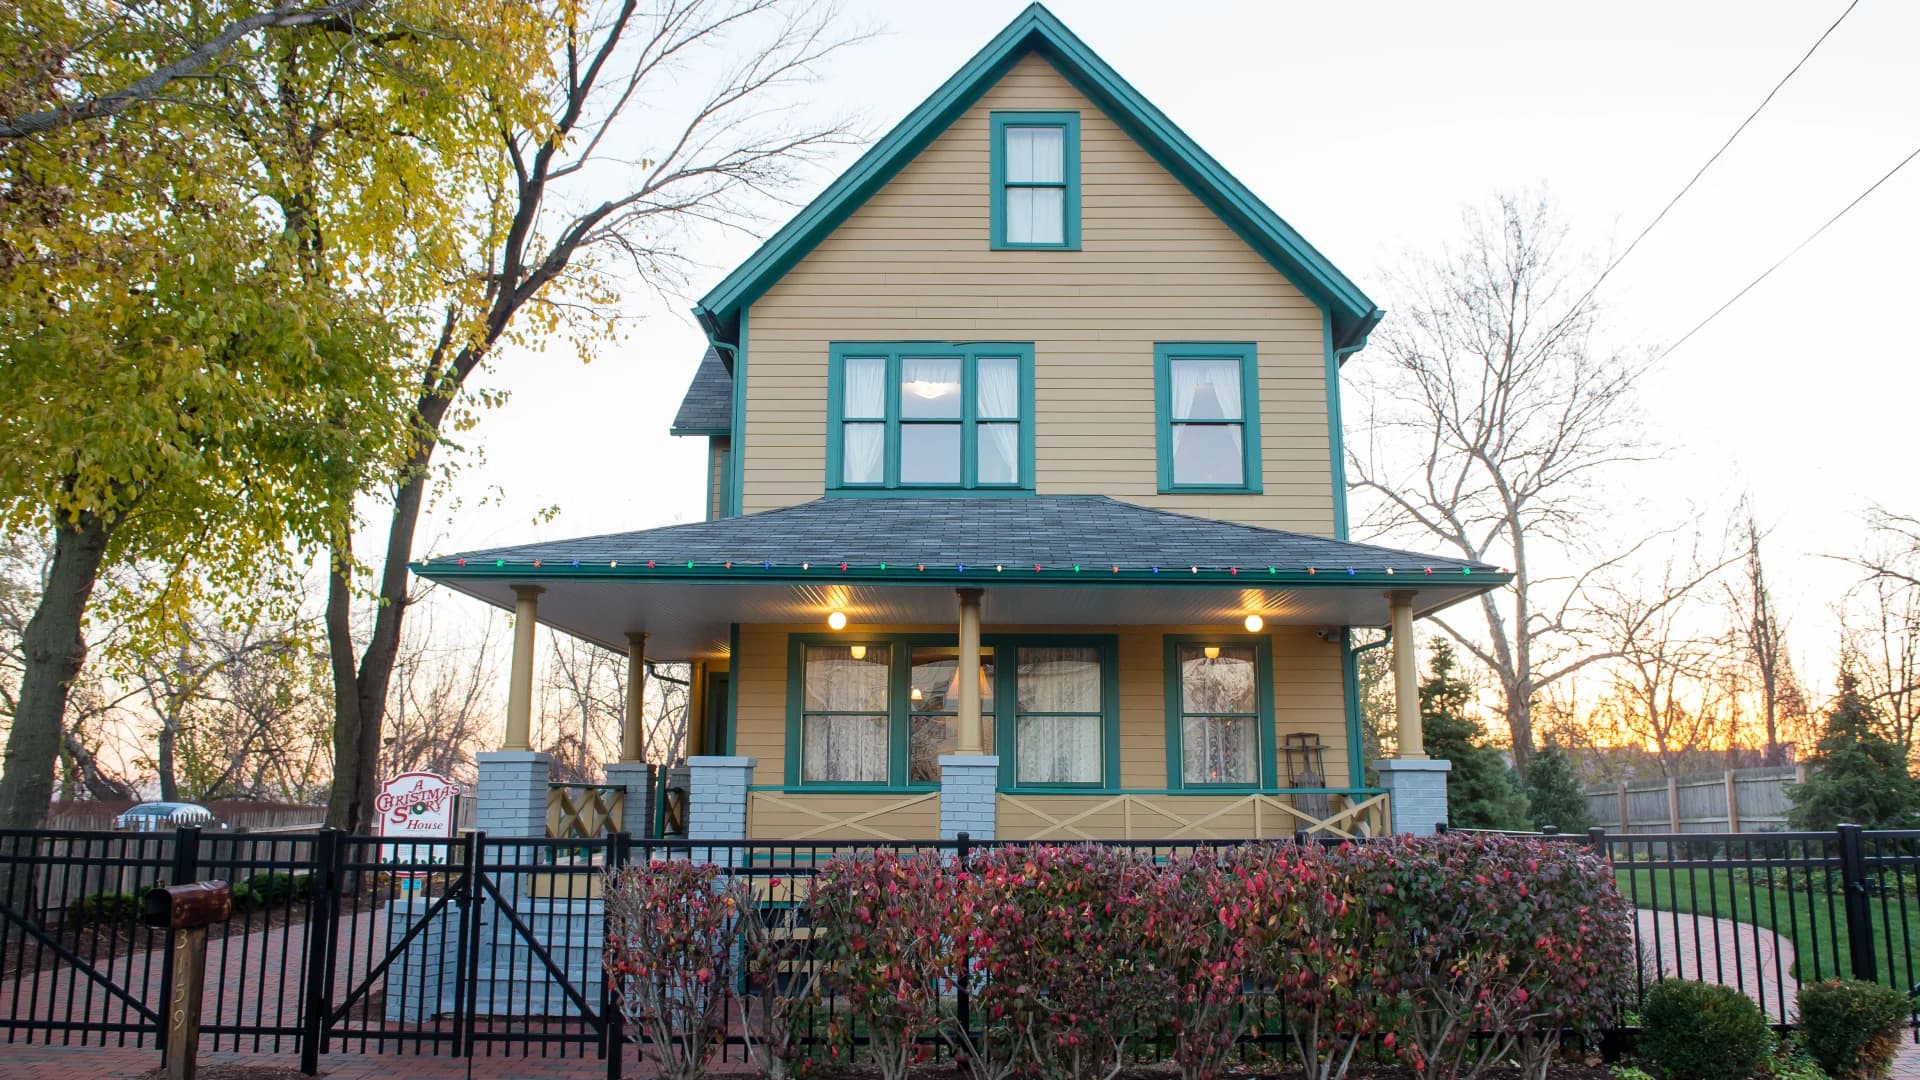 Visit Ralphie’s actual house from ‘A Christmas Story’ from the comfort of your home